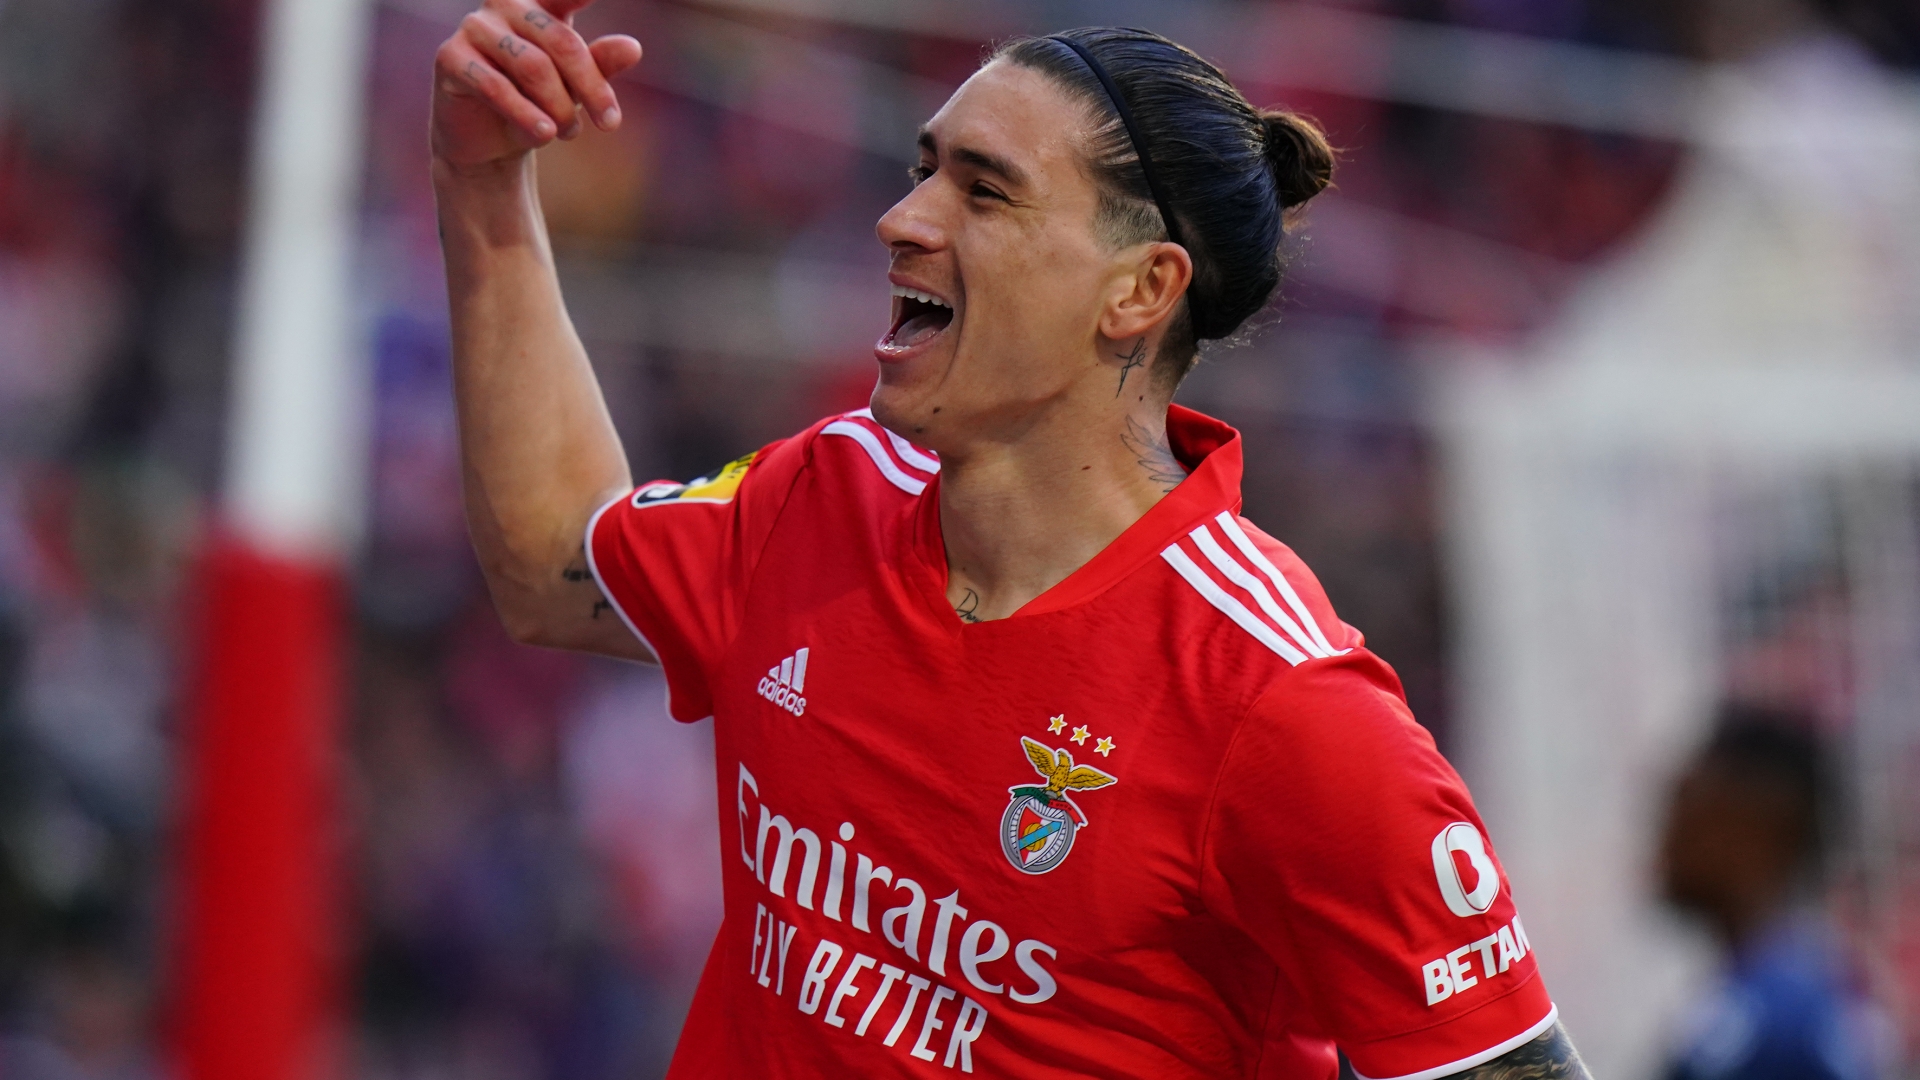 Manchester United signing Arsenal transfer target Darwin Nunez from Benfica would be 'spectacular', says Diego Forlan